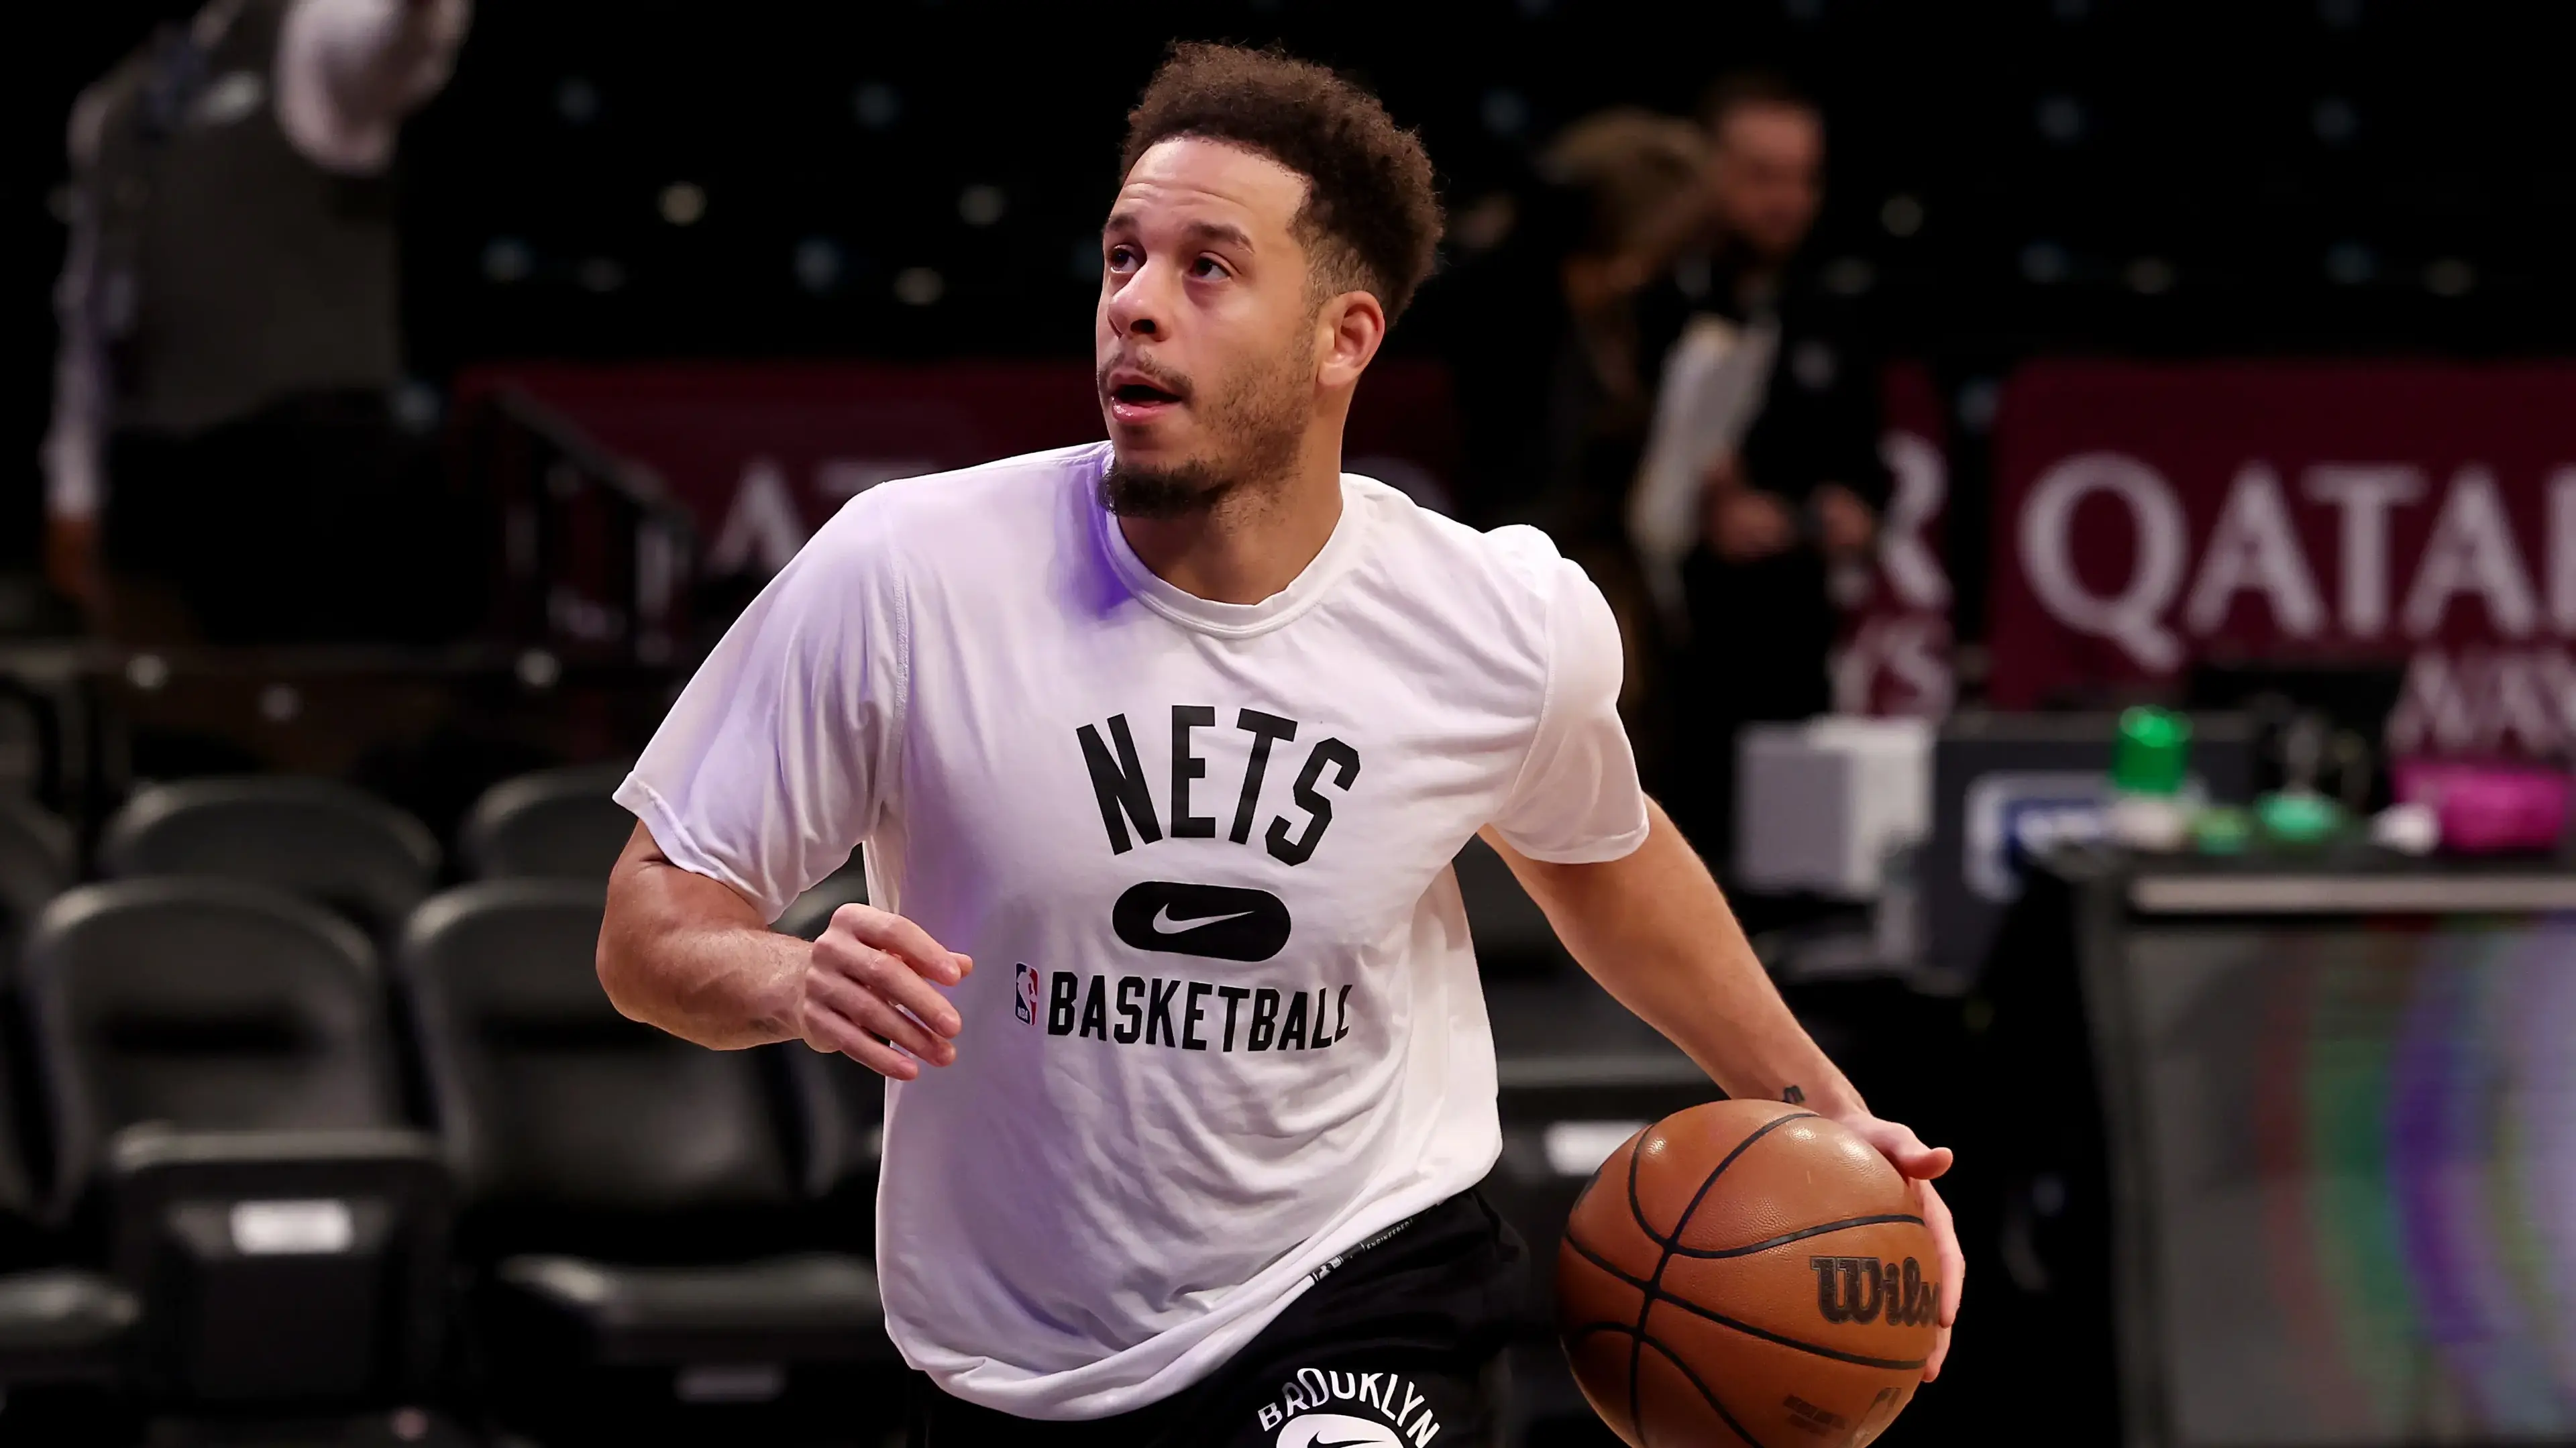 Mar 18, 2022; Brooklyn, New York, USA; Brooklyn Nets guard Seth Curry (30) warms up before the game against the Portland Trail Blazers at Barclays Center. Mandatory Credit: Vincent Carchietta-USA TODAY Sports / Vincent Carchietta-USA TODAY Sports